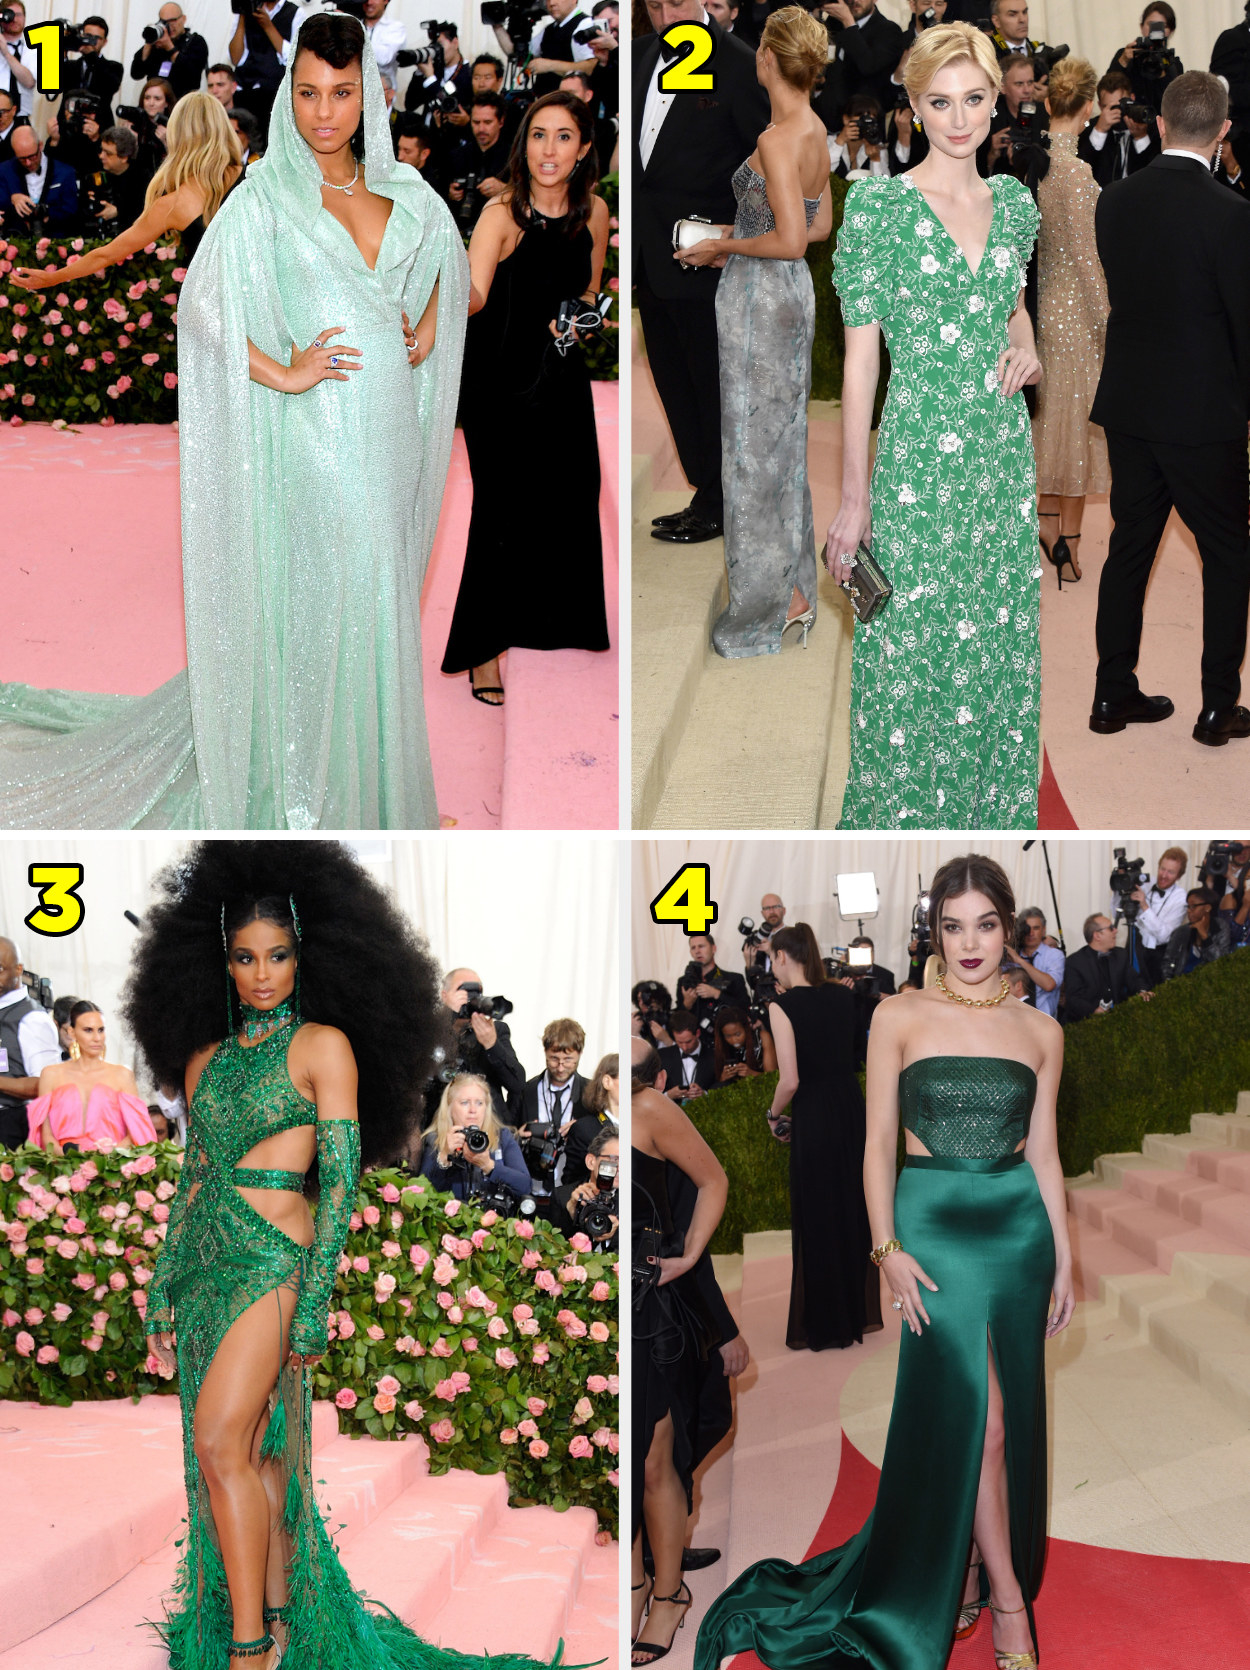 1. A long sequined gown with a hood. 2. A short sleeved gown with a floral pattern. 3 a sleeveless dress with cut outs on the ribs and hips. 4. Strapless gown with cutouts by the ribs.